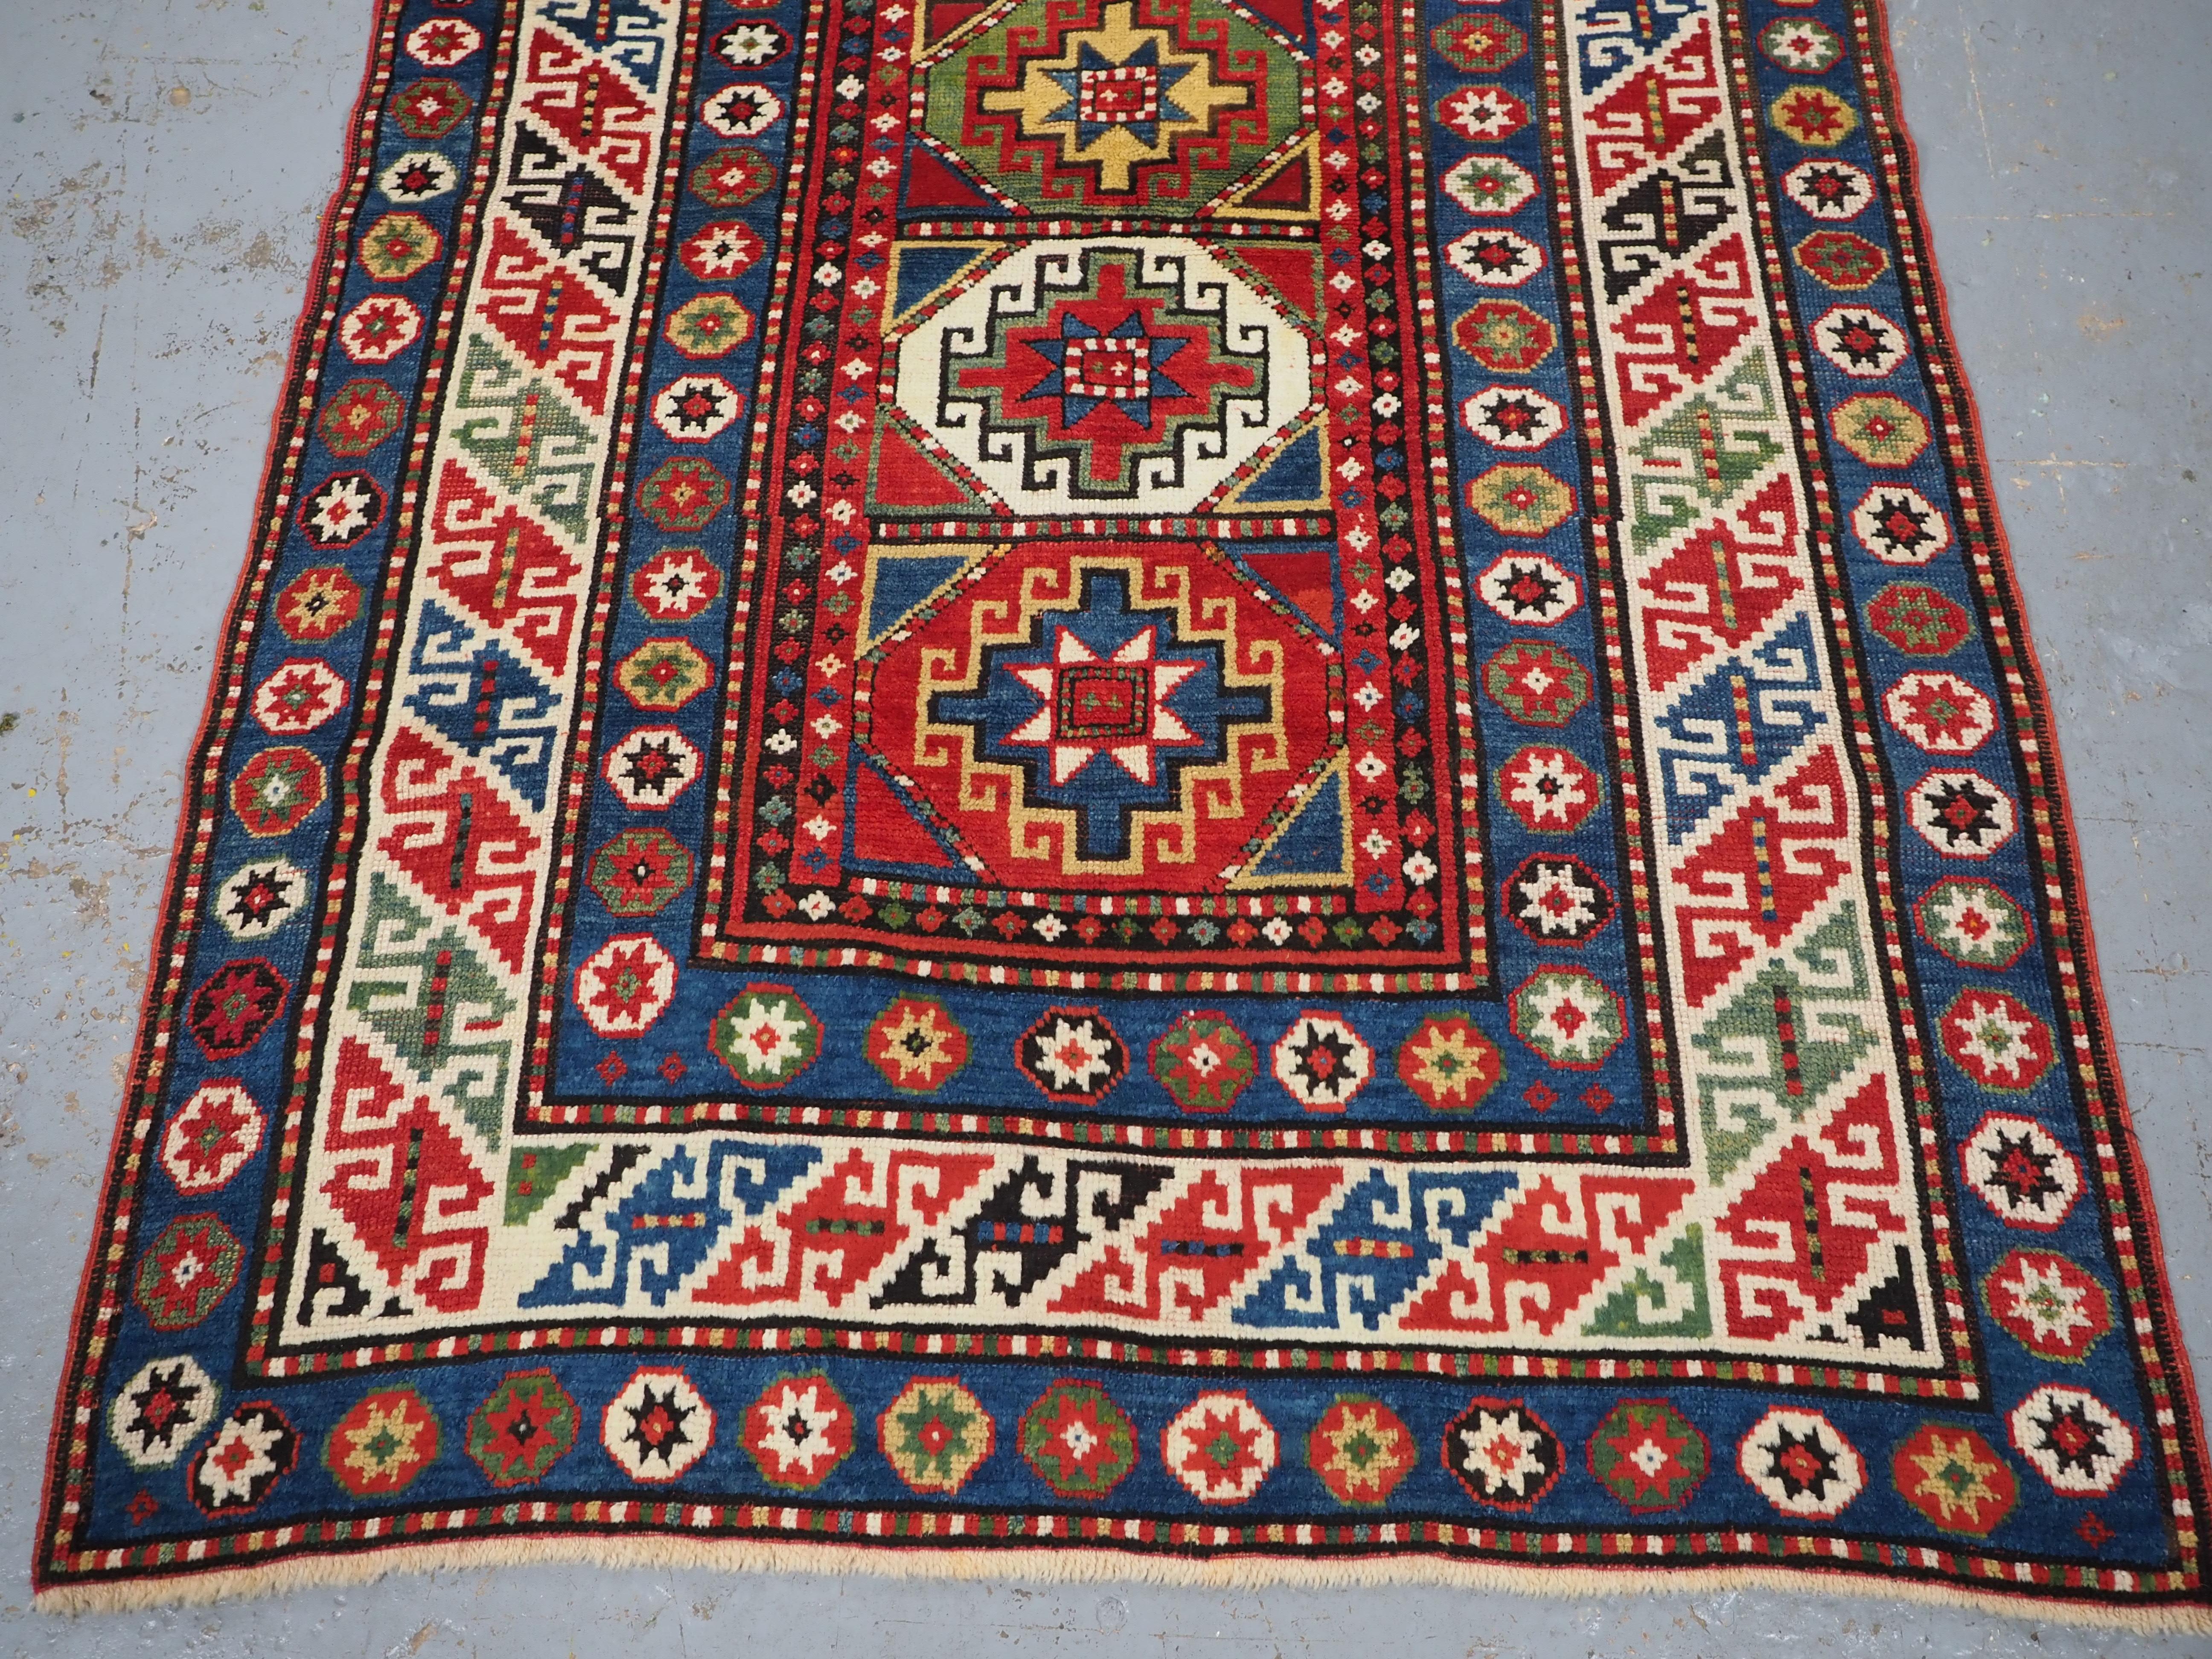 Wool Antique Caucasian Kazak rug with a single column of boxed 'Memlinc guls'. For Sale